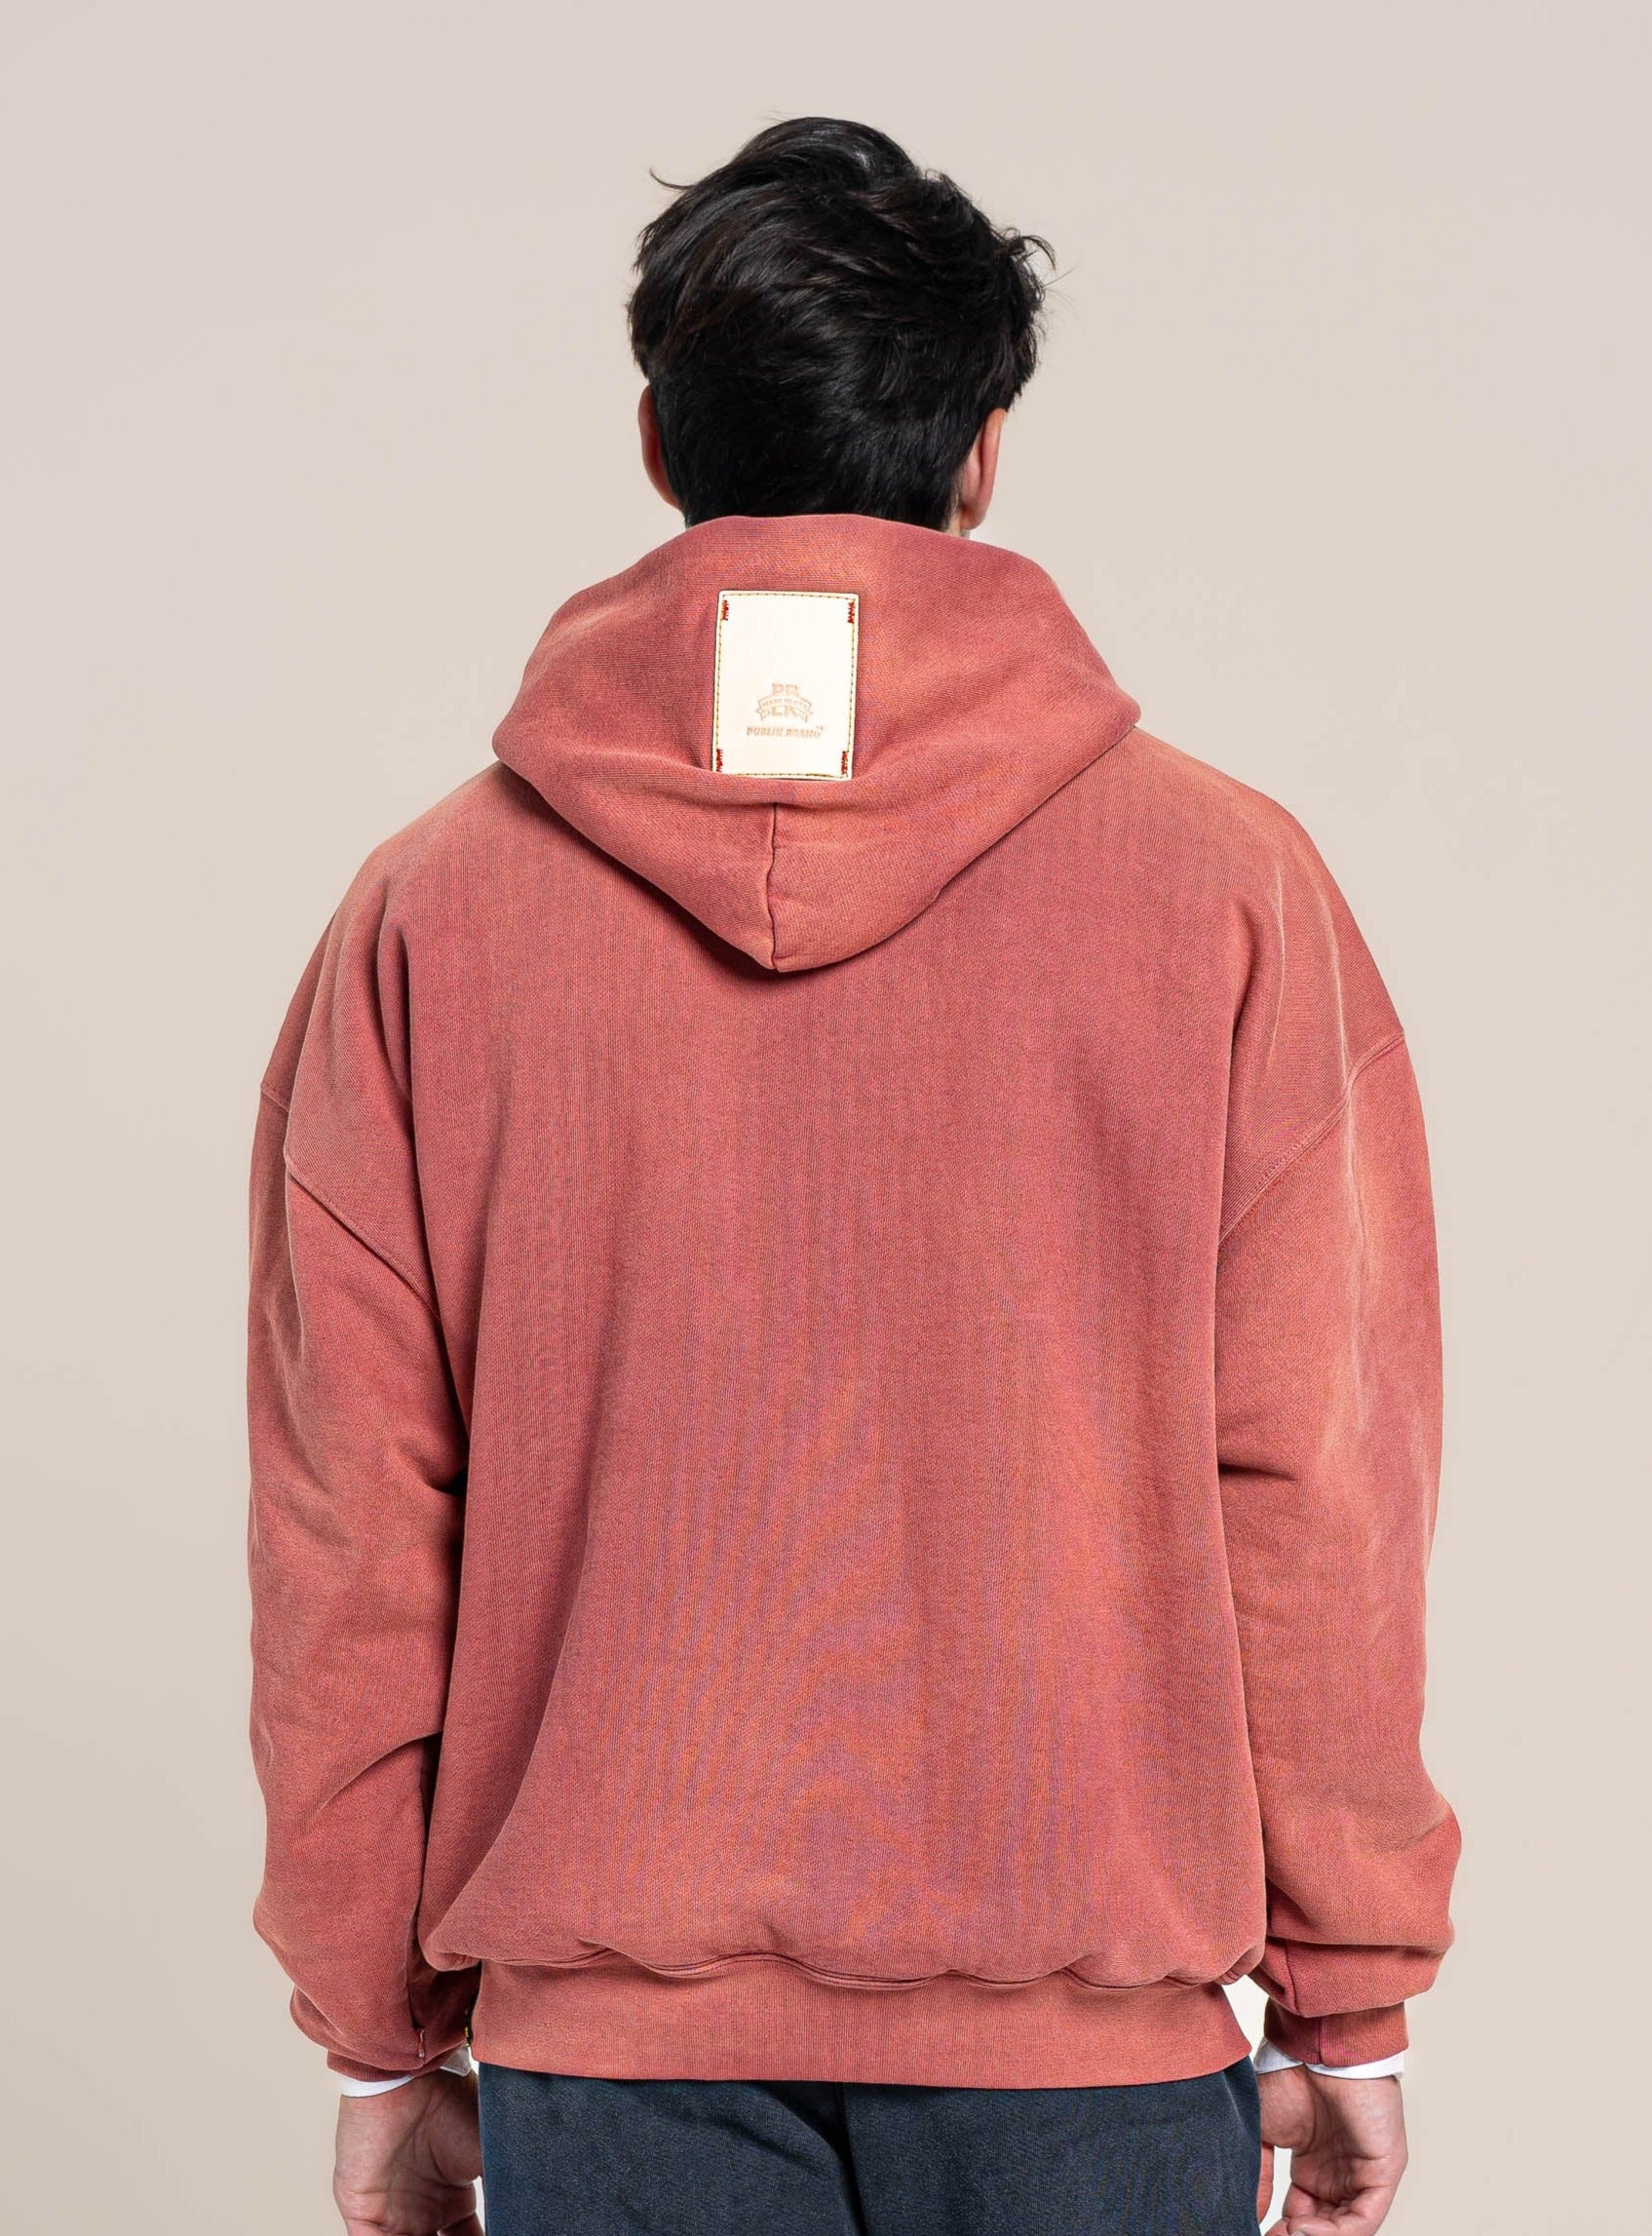 Publik Brand Double Layered Hoodie Tea Rose Red Heavyweight Fleece, all made in USA, back detail with the brand logo leather patch